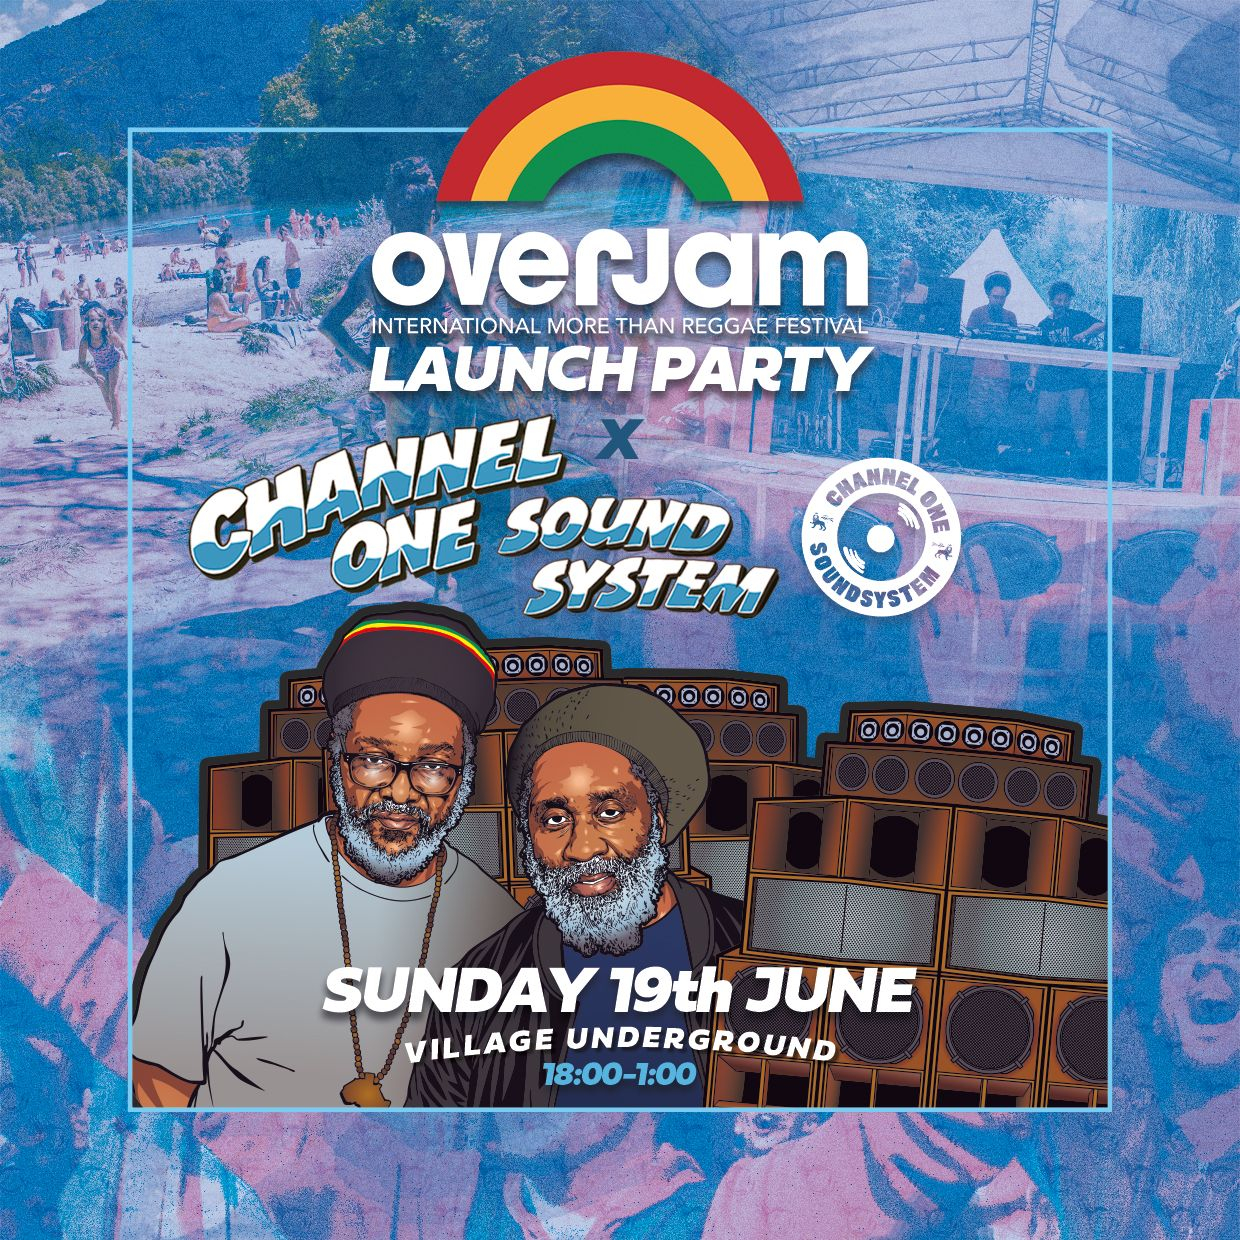 [POSTPONED] Overjam Festival Launch Party w/ Channel One Sound System - Flyer back